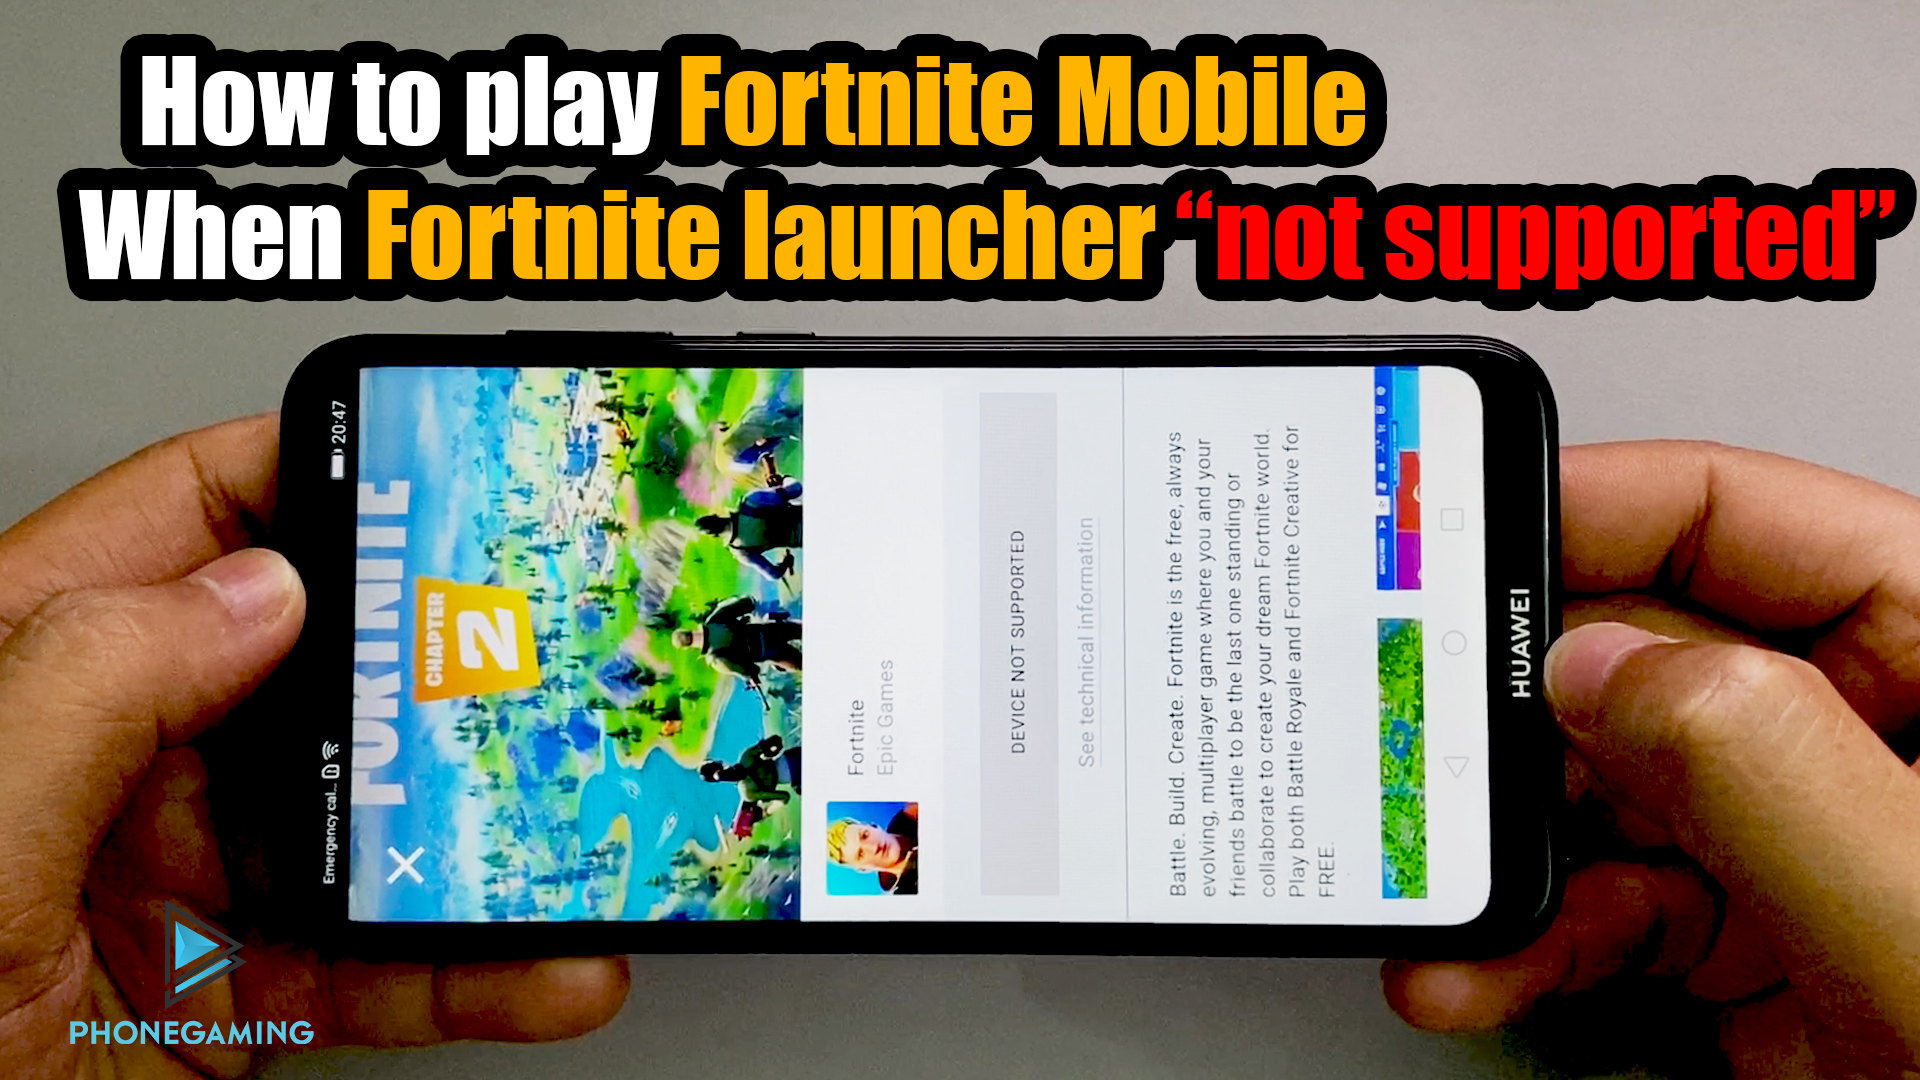 How to play FORTNITE Mobile When Fortnite Launcher "Device Not